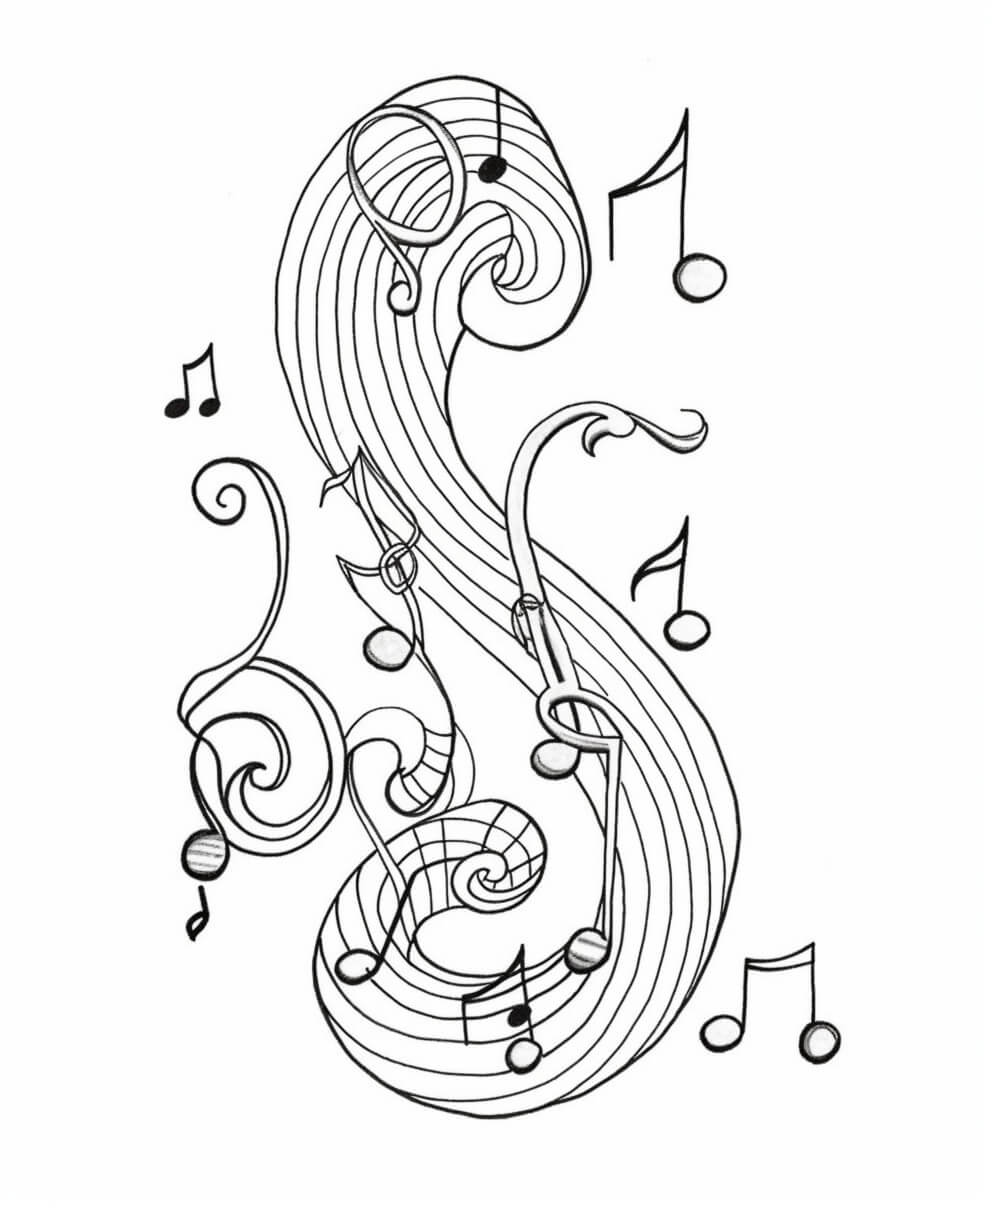 Music Note Colouring Sheet (Free and printable)